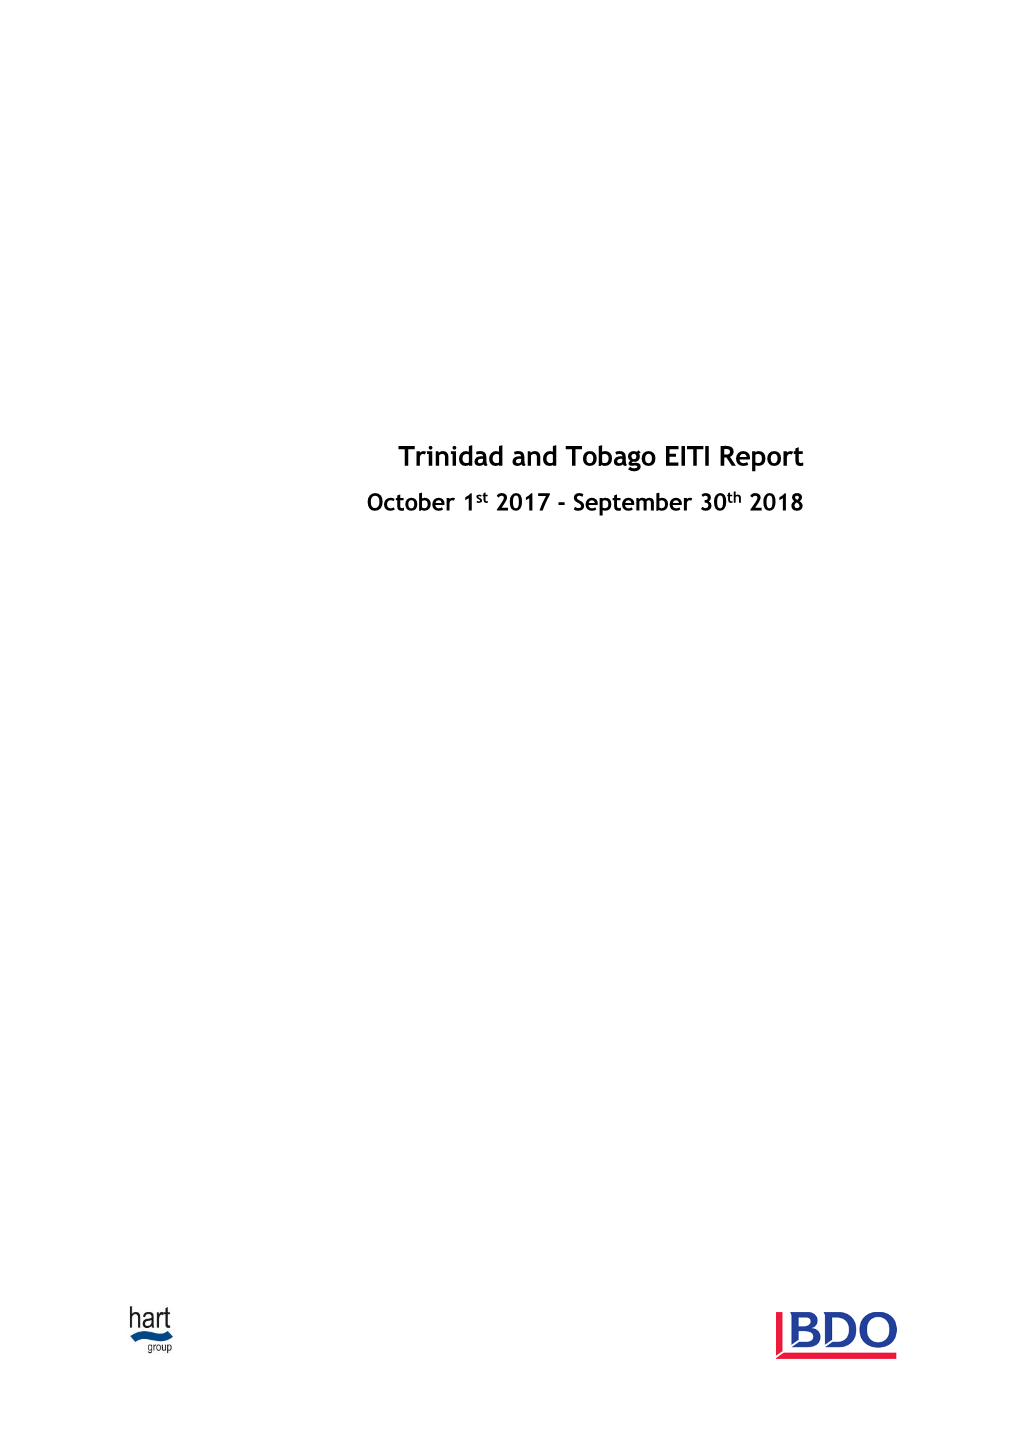 Trinidad and Tobago EITI Report October 1St 2017 - September 30Th 2018